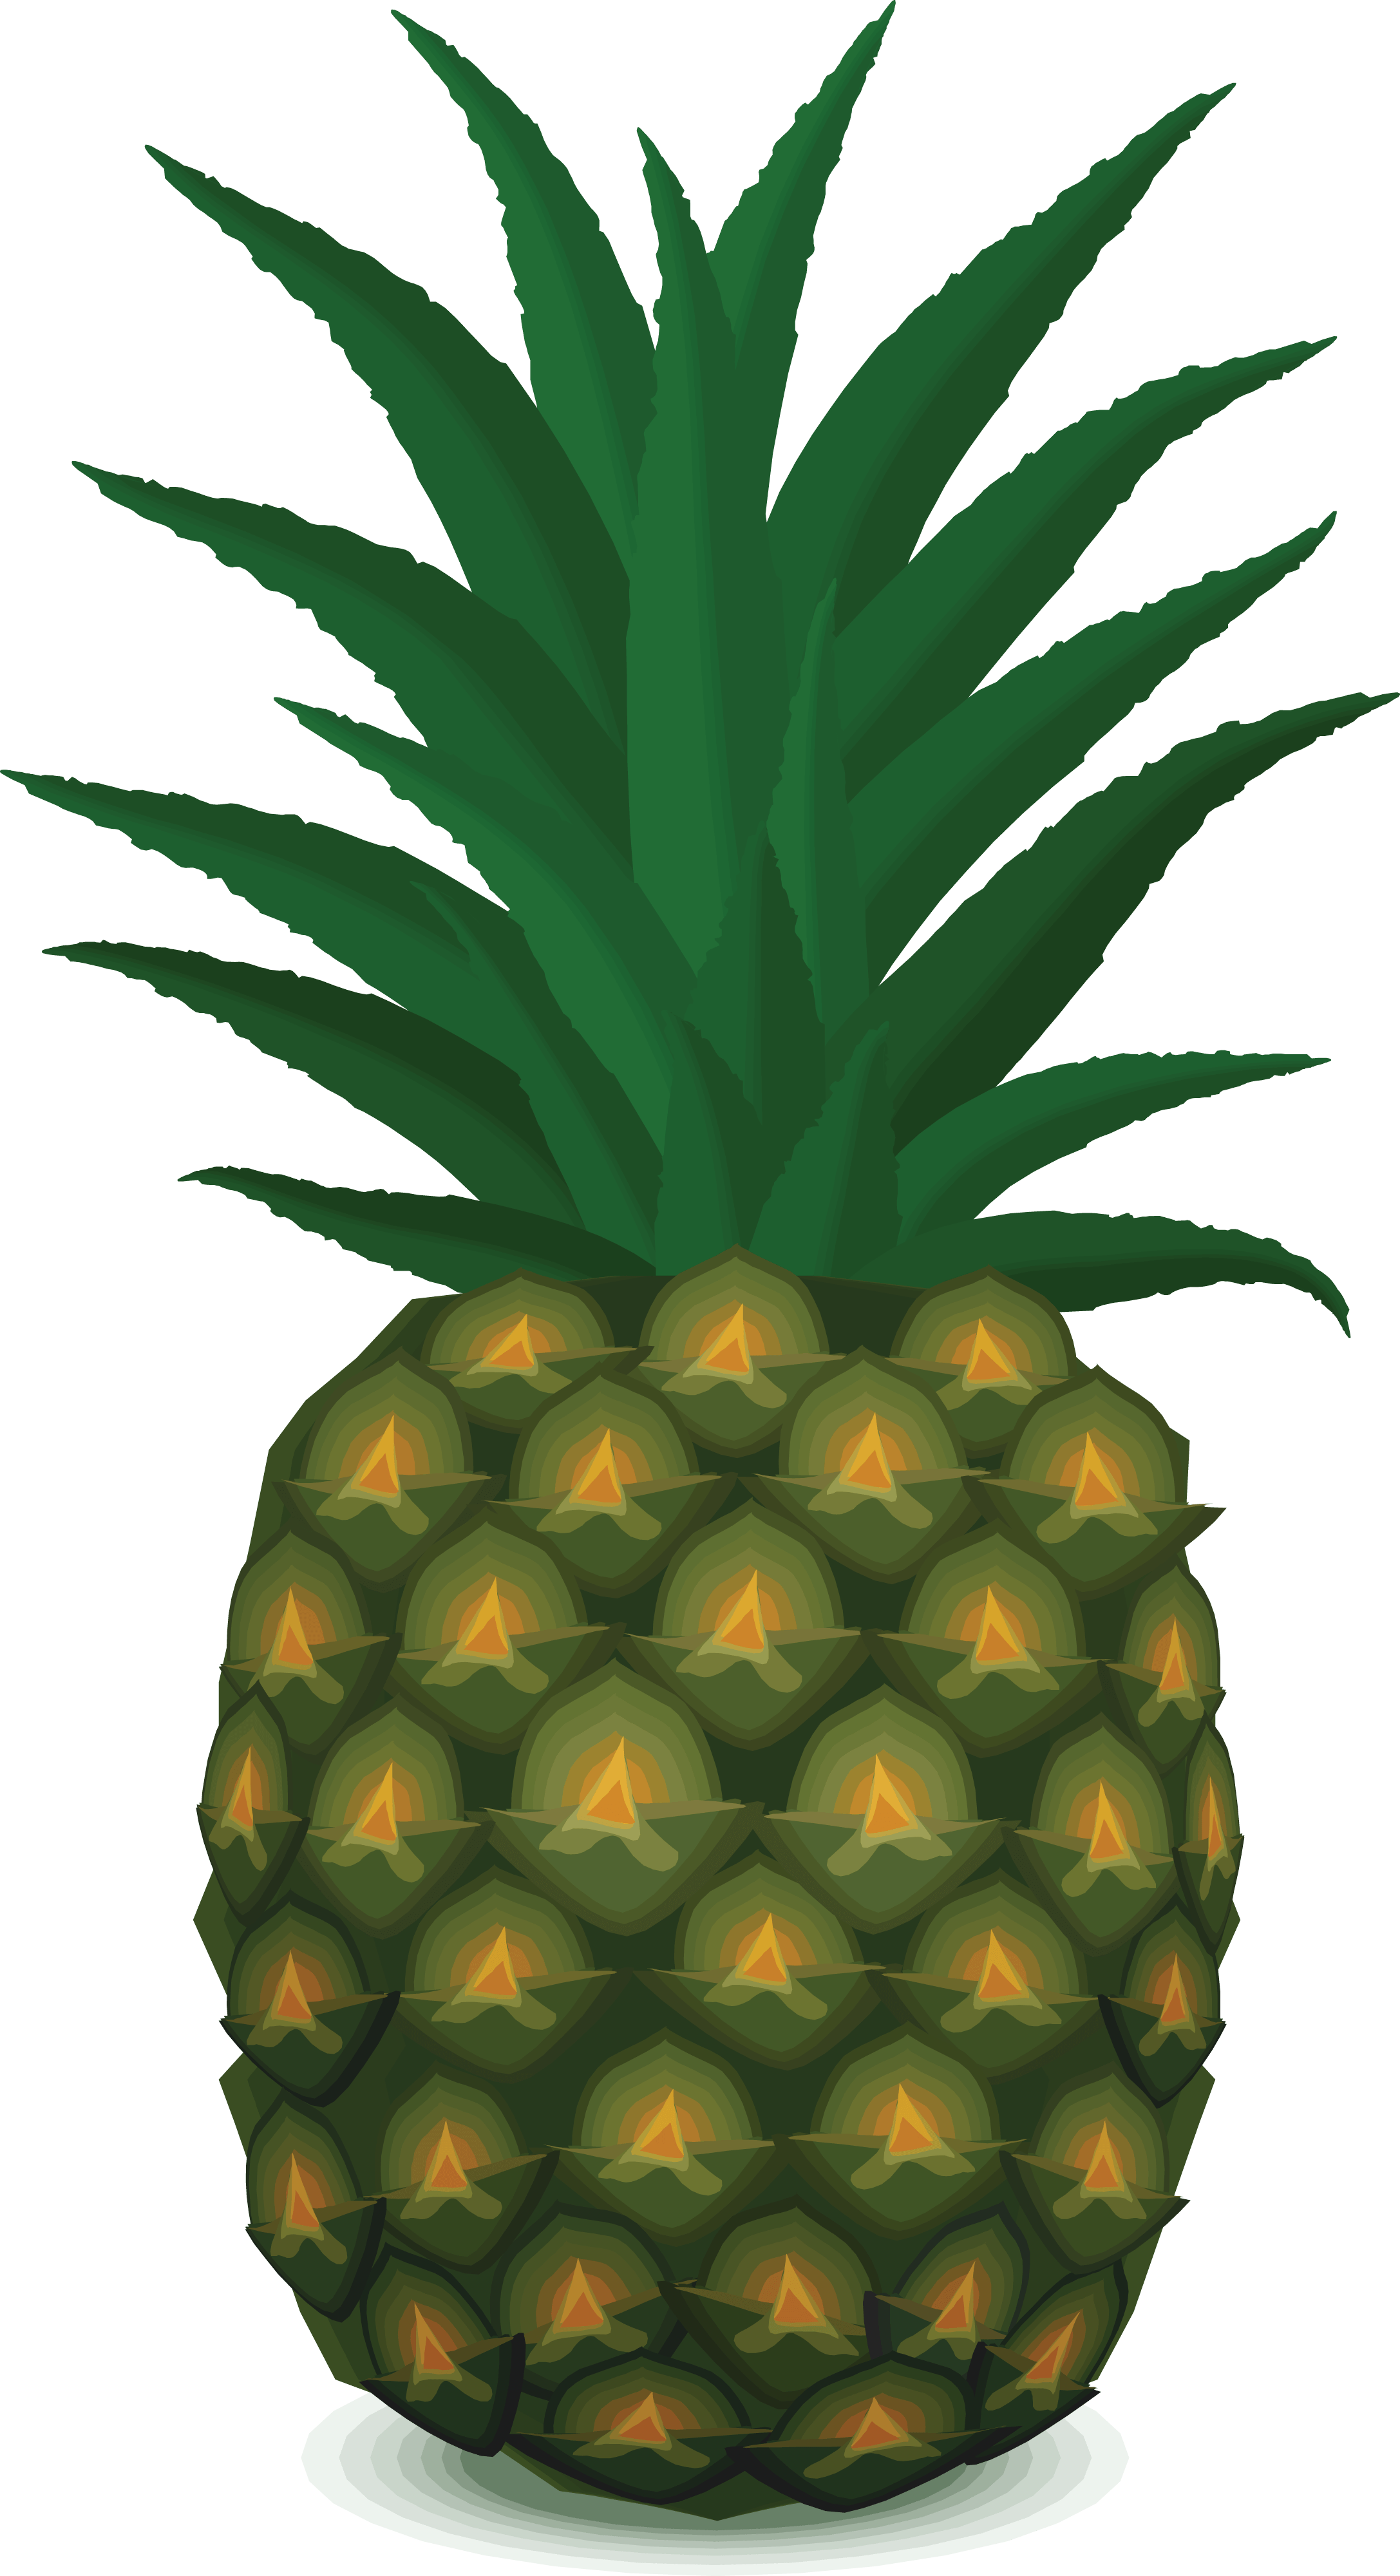 Download PNG image - Pineapple PNG Download Image 